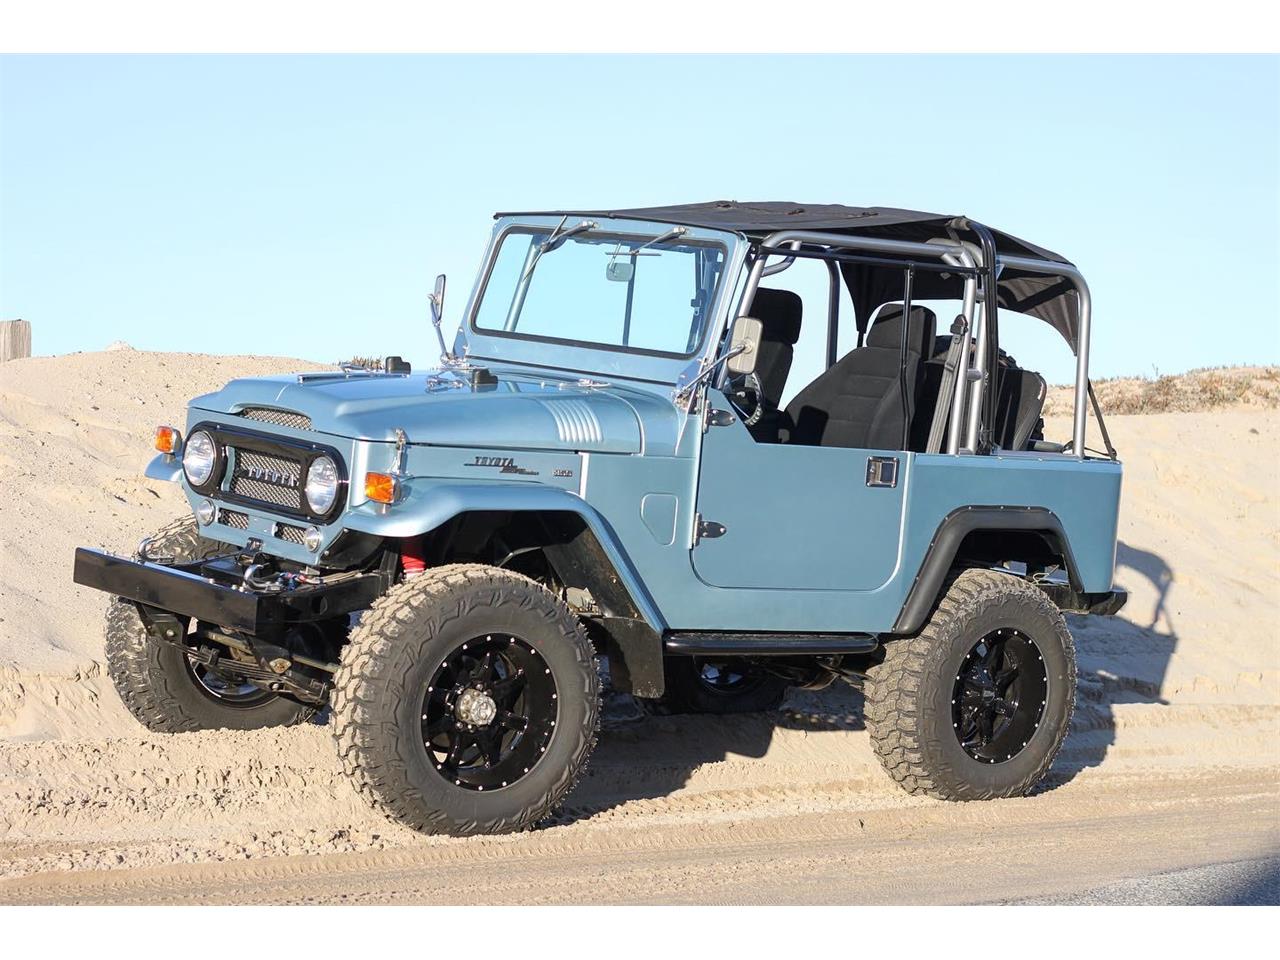 1968 Toyota Land Cruiser FJ40 for sale in Fountain Valley, CA